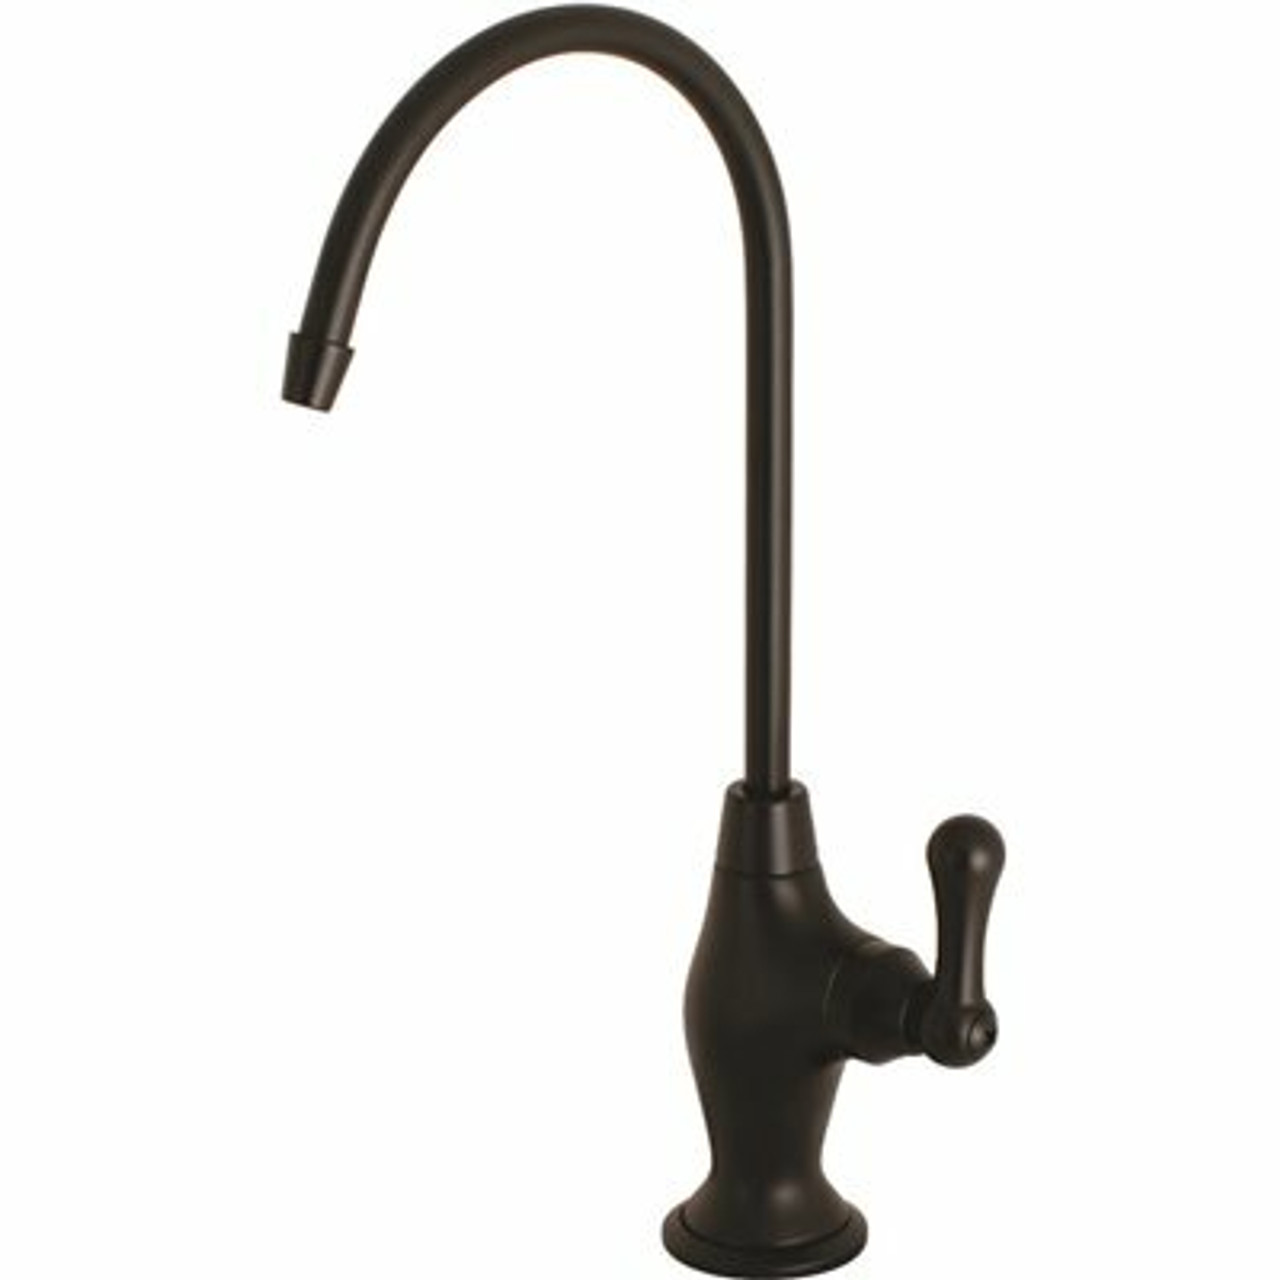 Kingston Brass Replacement Single-Handle Beverage Faucet In Matte Black For Filtration Systems